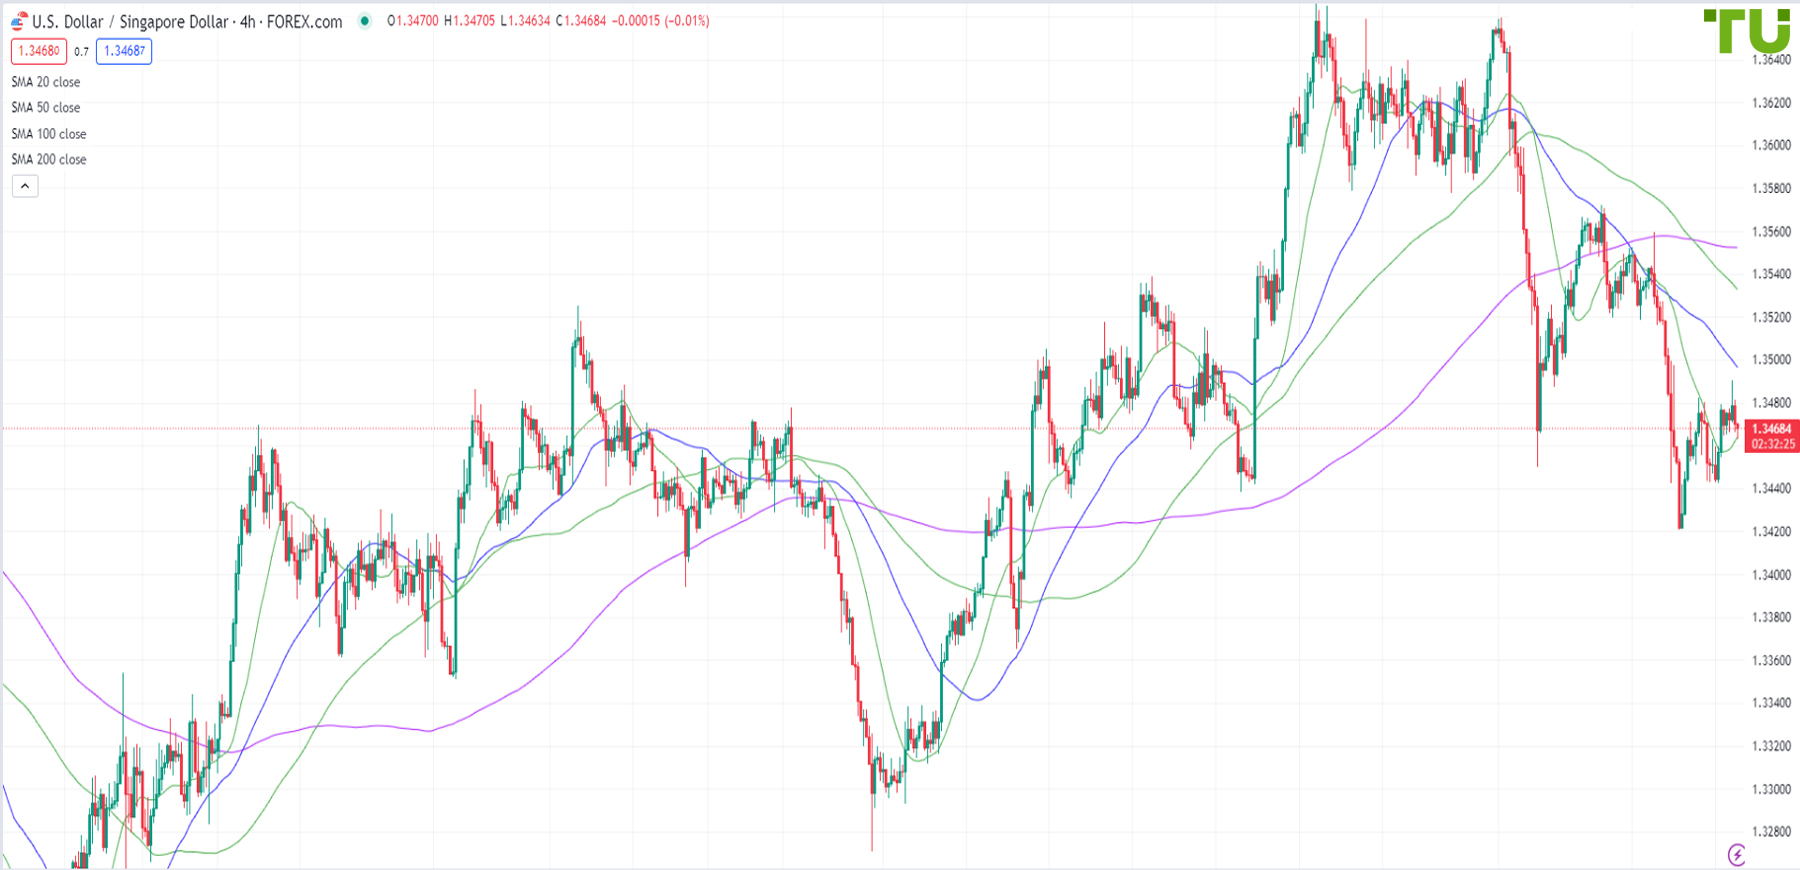 USD/SGD is under pressure after growth attempt